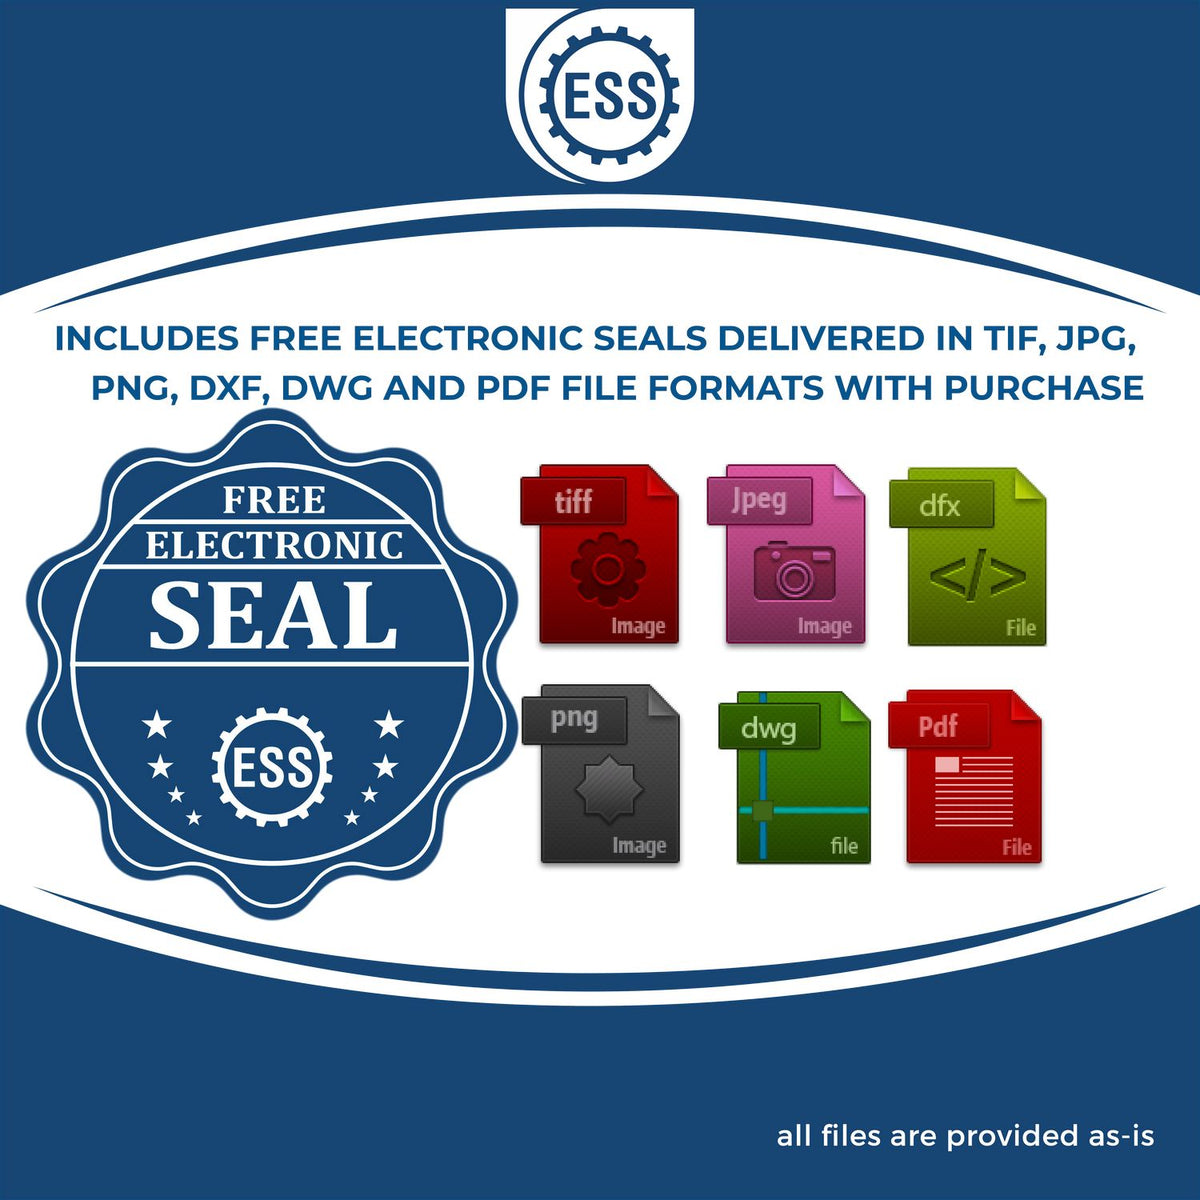 An infographic for the free electronic seal for the Hybrid Florida Engineer Seal illustrating the different file type icons such as DXF, DWG, TIF, JPG and PNG.